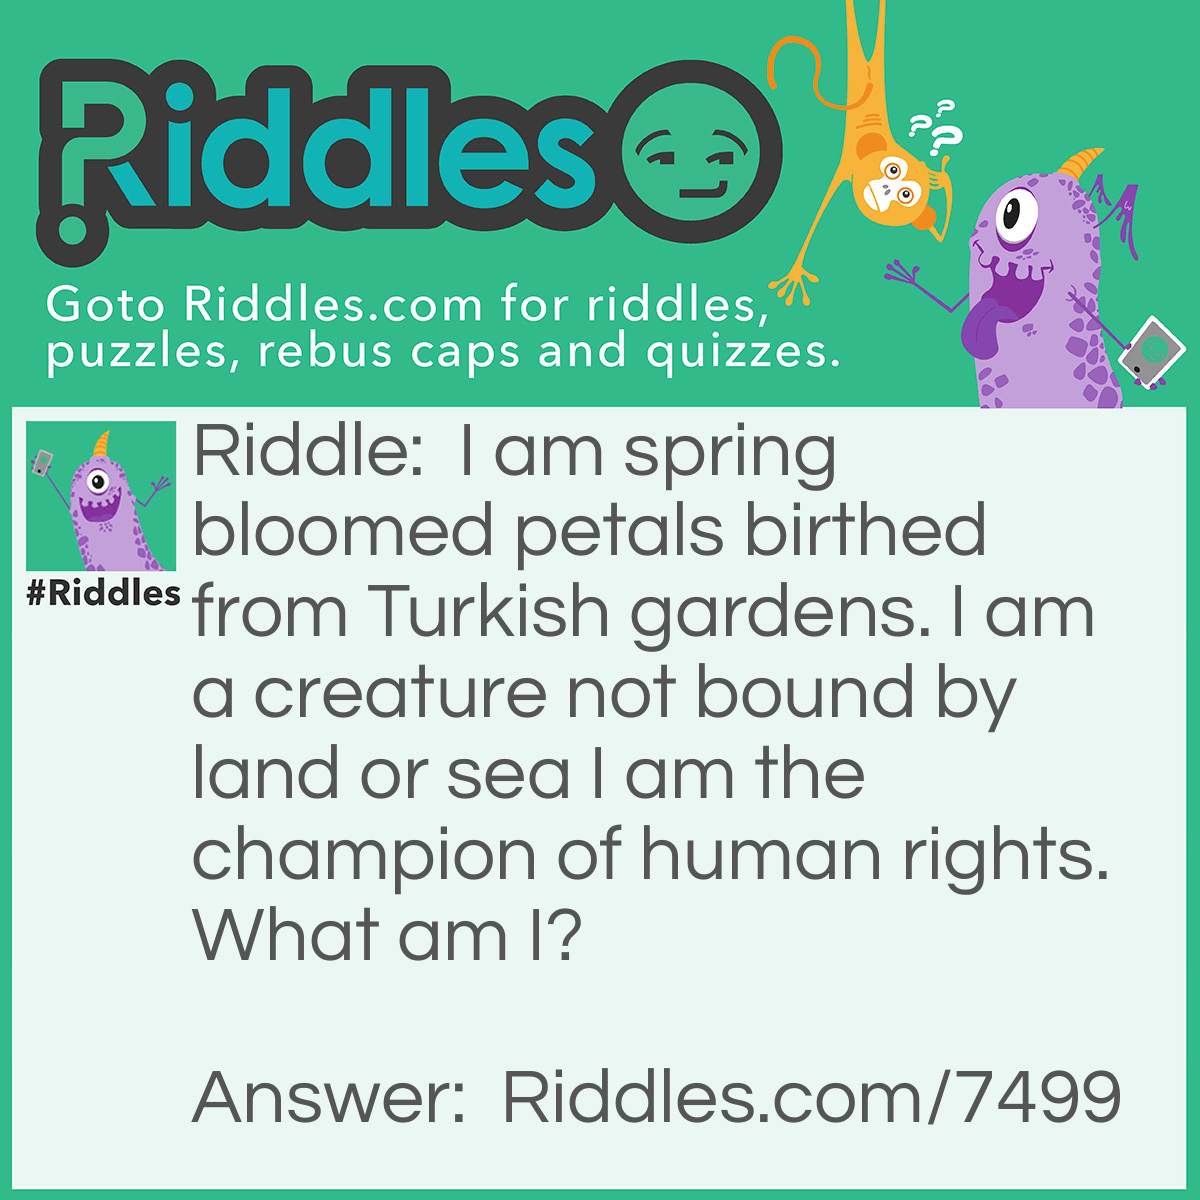 Riddle: I am spring bloomed petals birthed from Turkish gardens. I am a creature not bound by land or sea I am the champion of human rights. What am I? Answer: Two lips (tulips).
Explanation:
Tulips were first <span class="ILfuVd" lang="en"><span class="hgKElc">cultivated by the Turks as early as 1000AD. </span></span>The botanical name for <em>tulips</em>, Tulipa, is derived from the <em>Turkish</em> word "tulbend" or "turban", which the flower resembles. It's considered the King of Bulbs.
Two lips are part of a person who is not bound by land or sea.
People use their lips to speak and protect human rights.
 
<div class="Z26q7c UK95Uc"> </div>